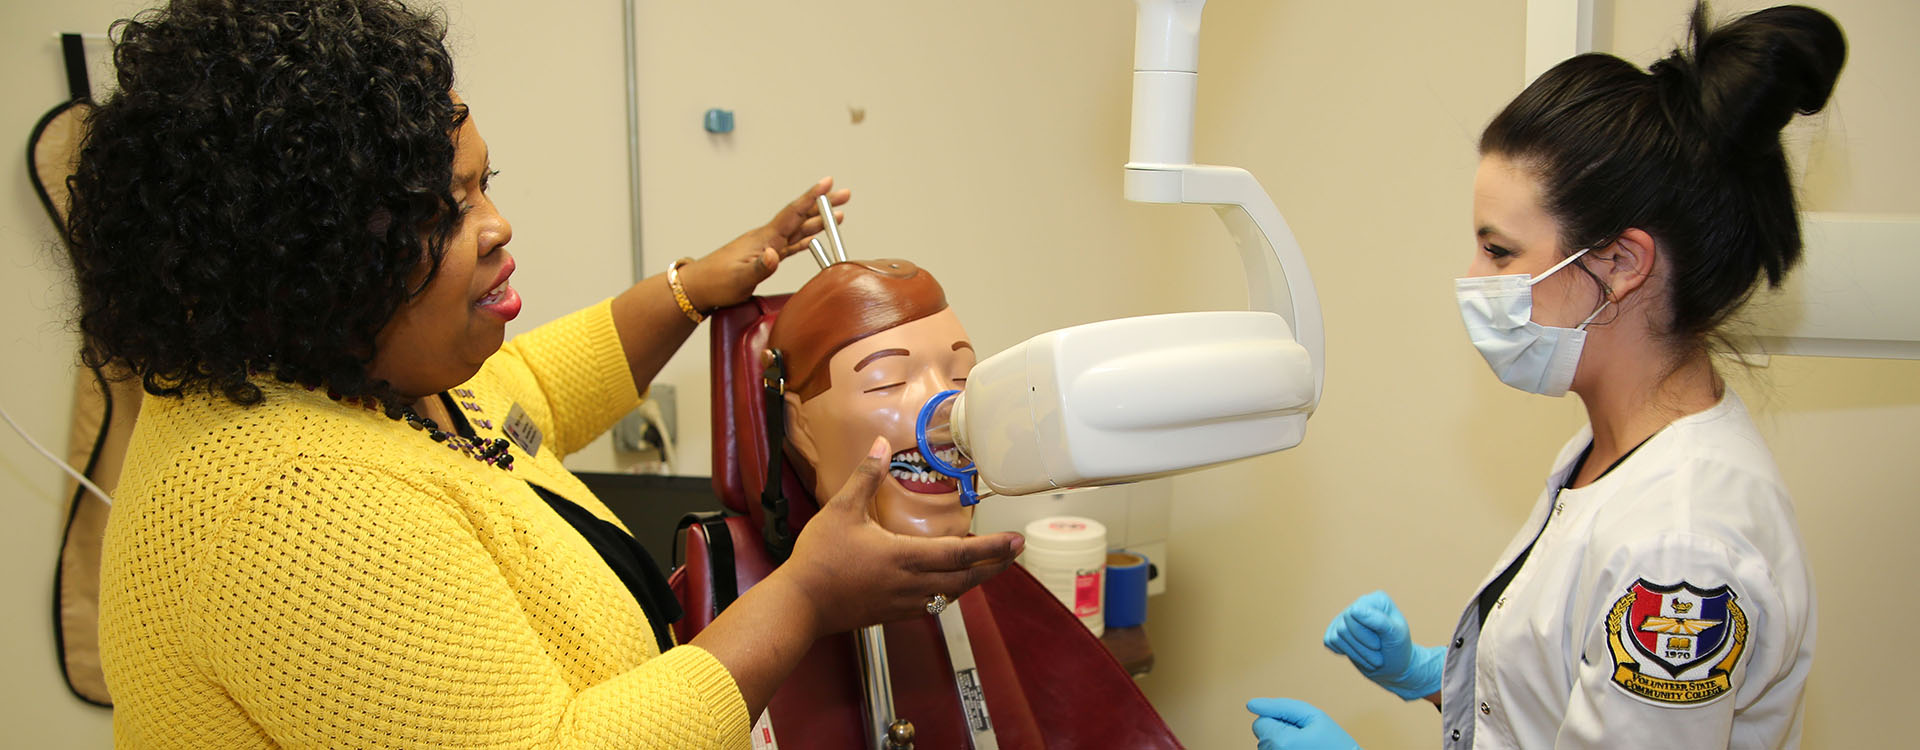 dental assisting student learning from teacher